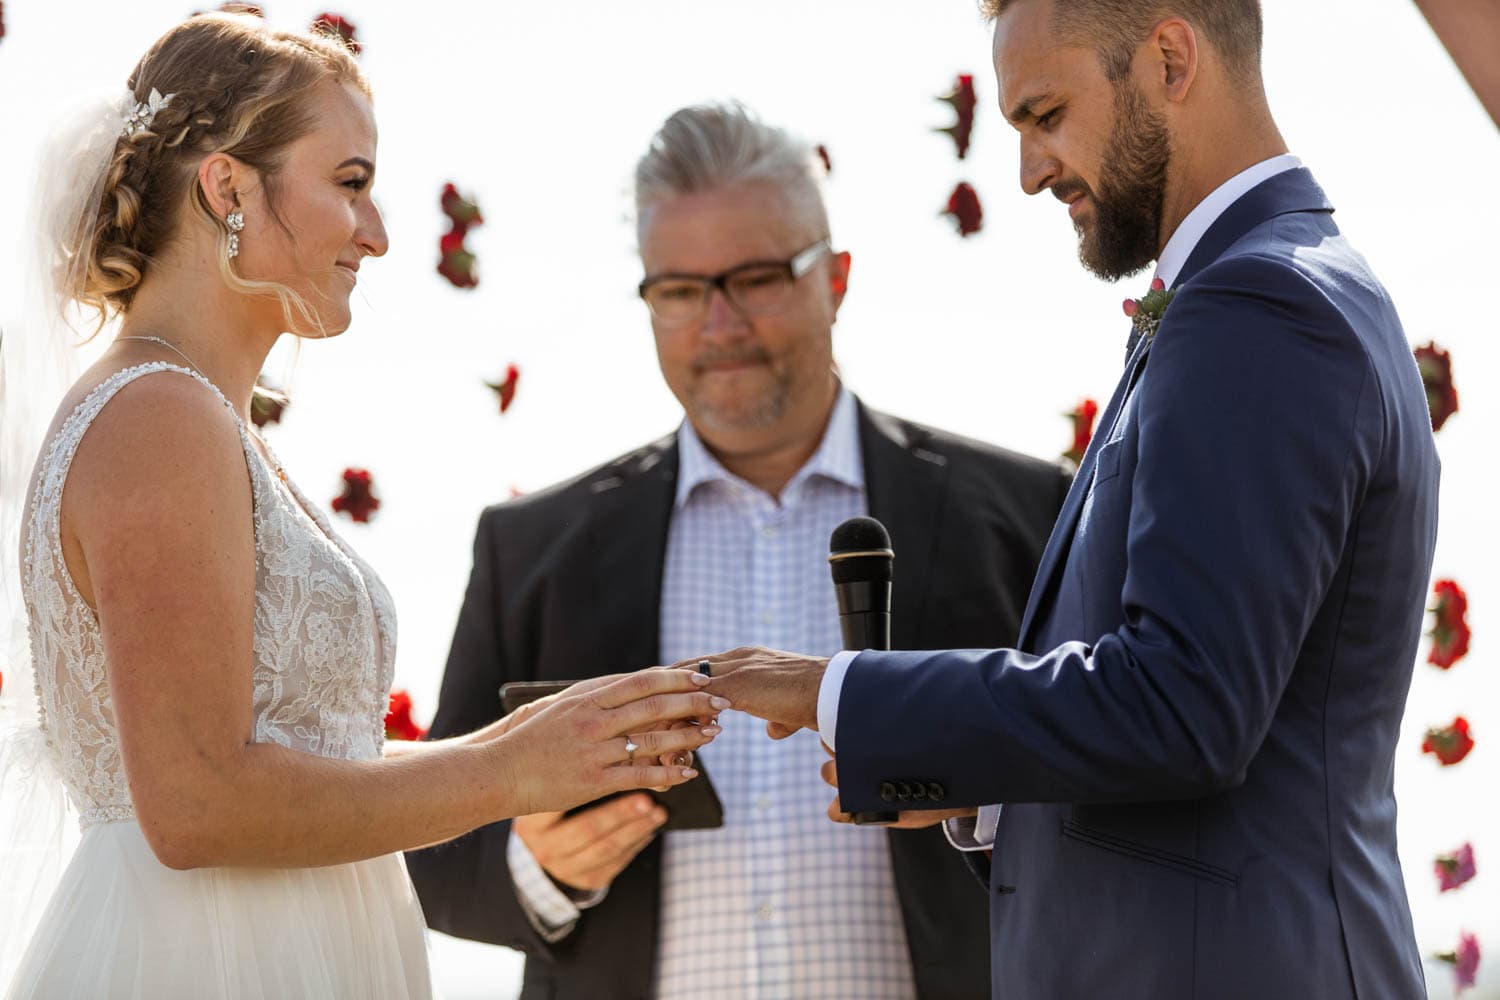 bride and groom exchanging rings at wedding ceremony